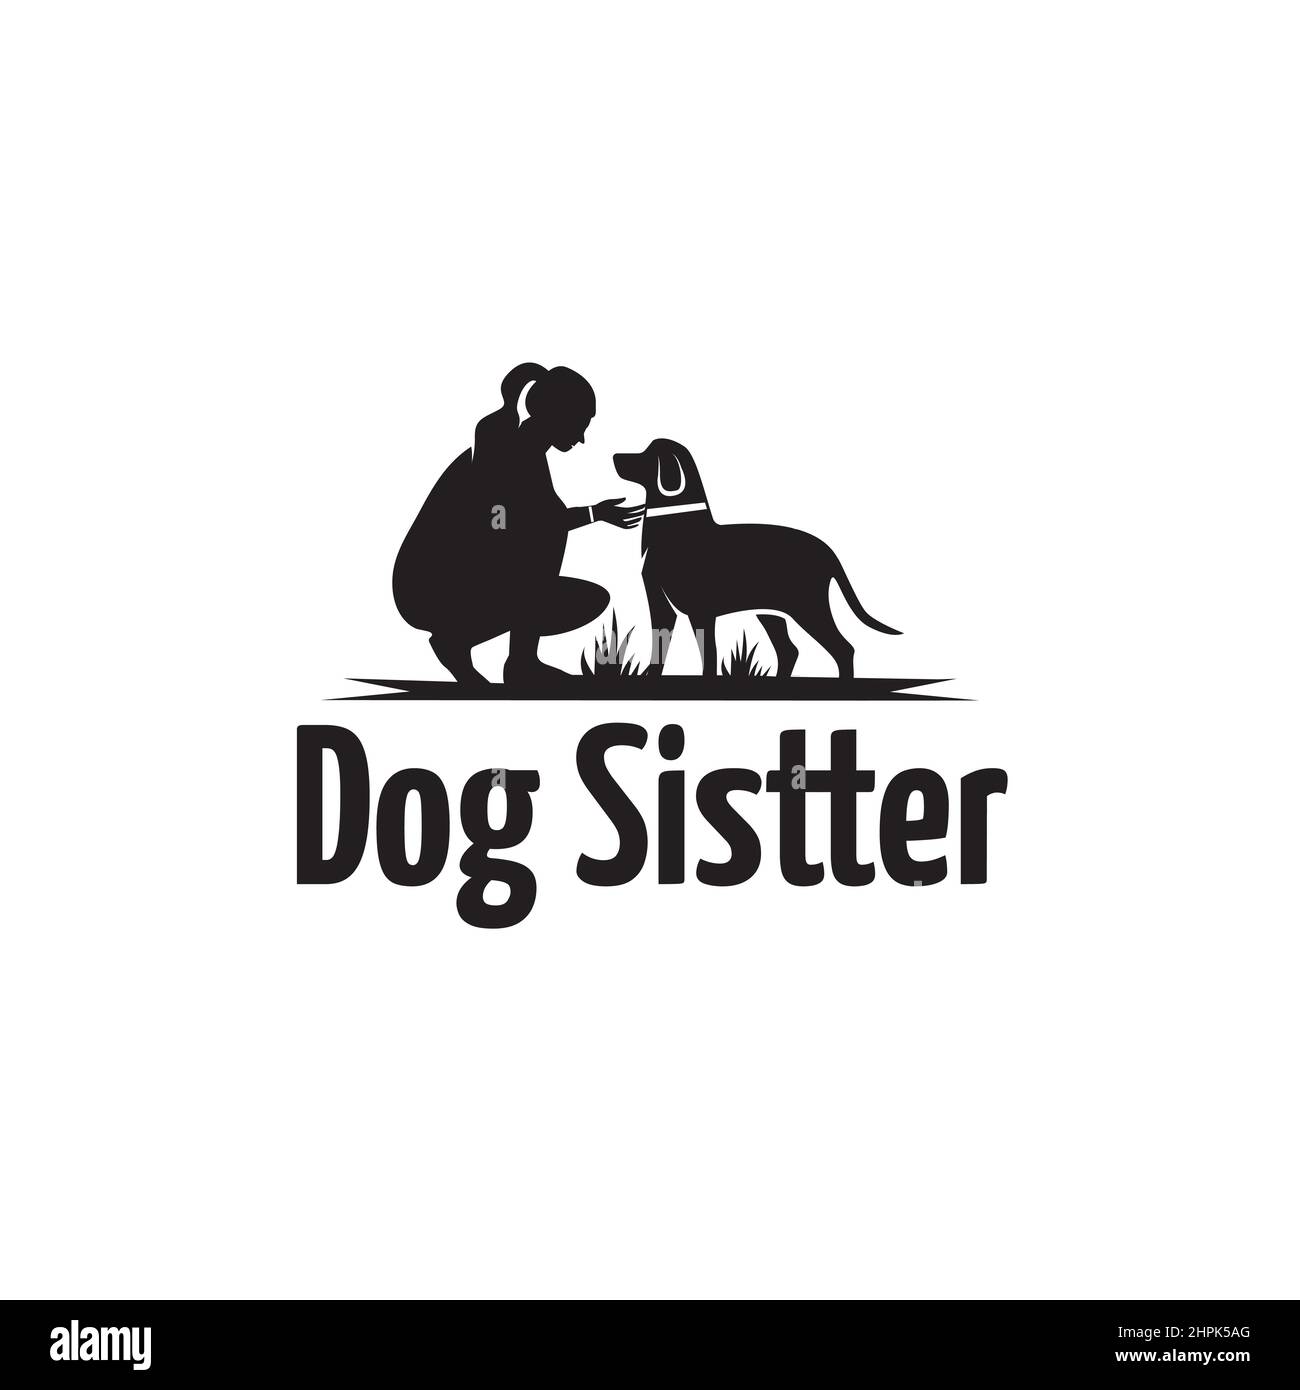 Dog walker silhouette Stock Vector Images - Alamy